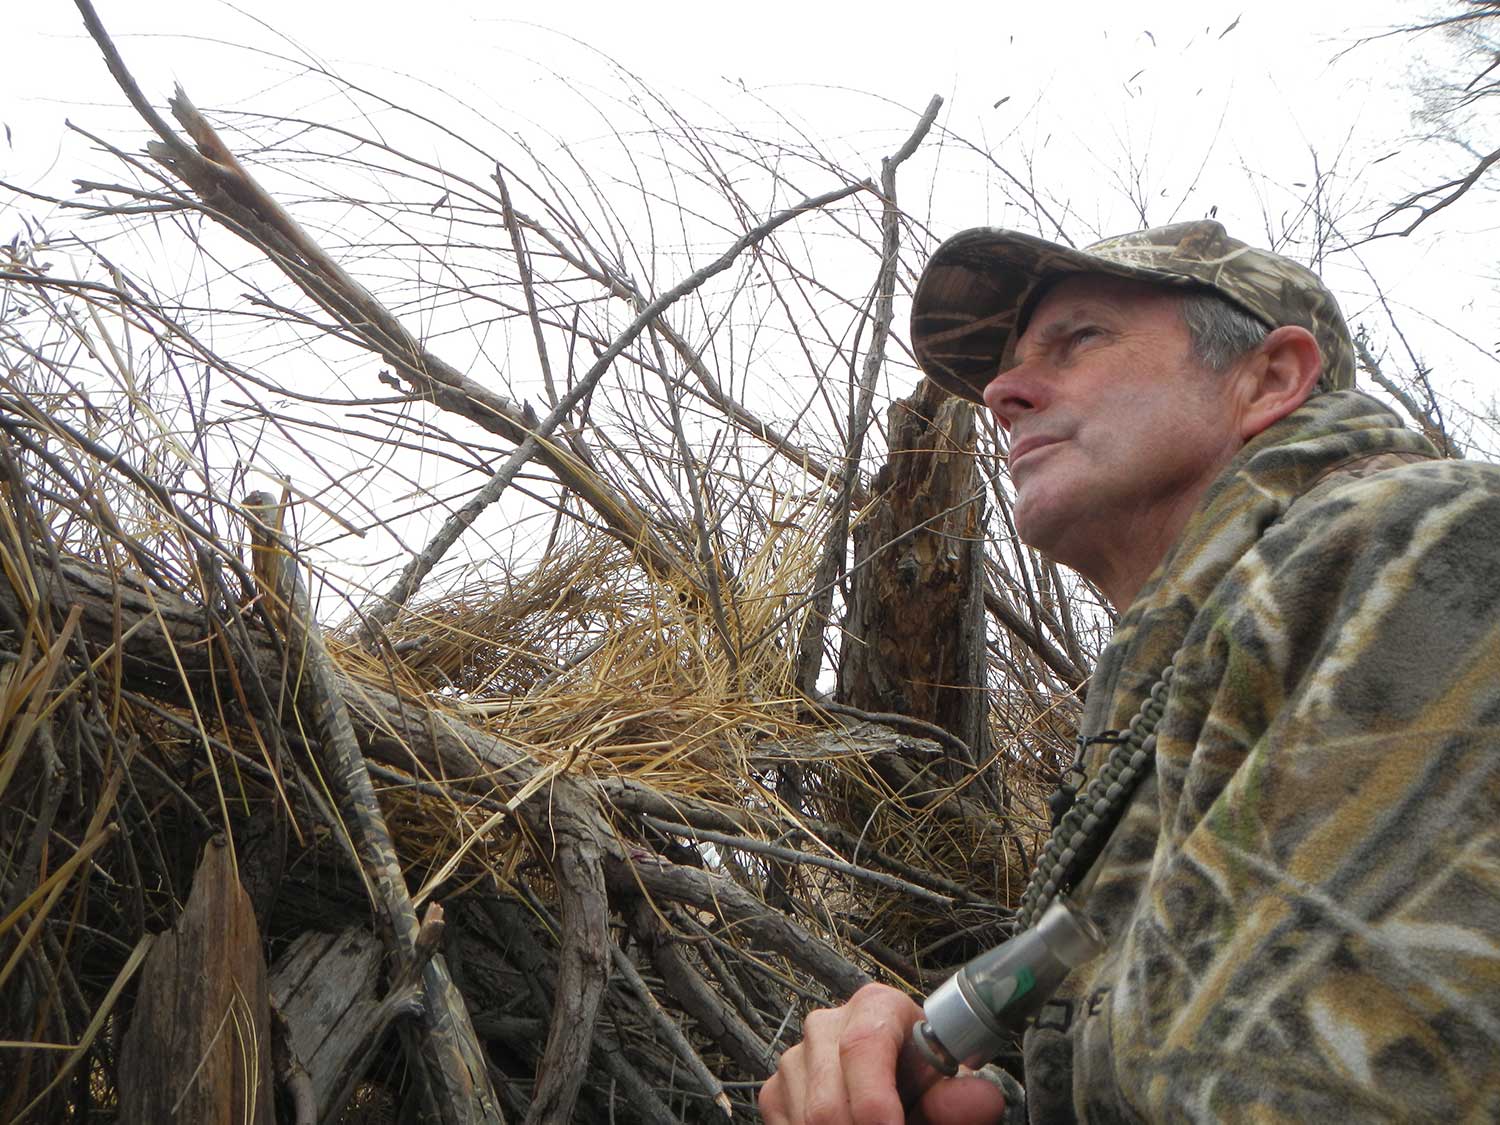 A hunter in a brush blind with a duck call.